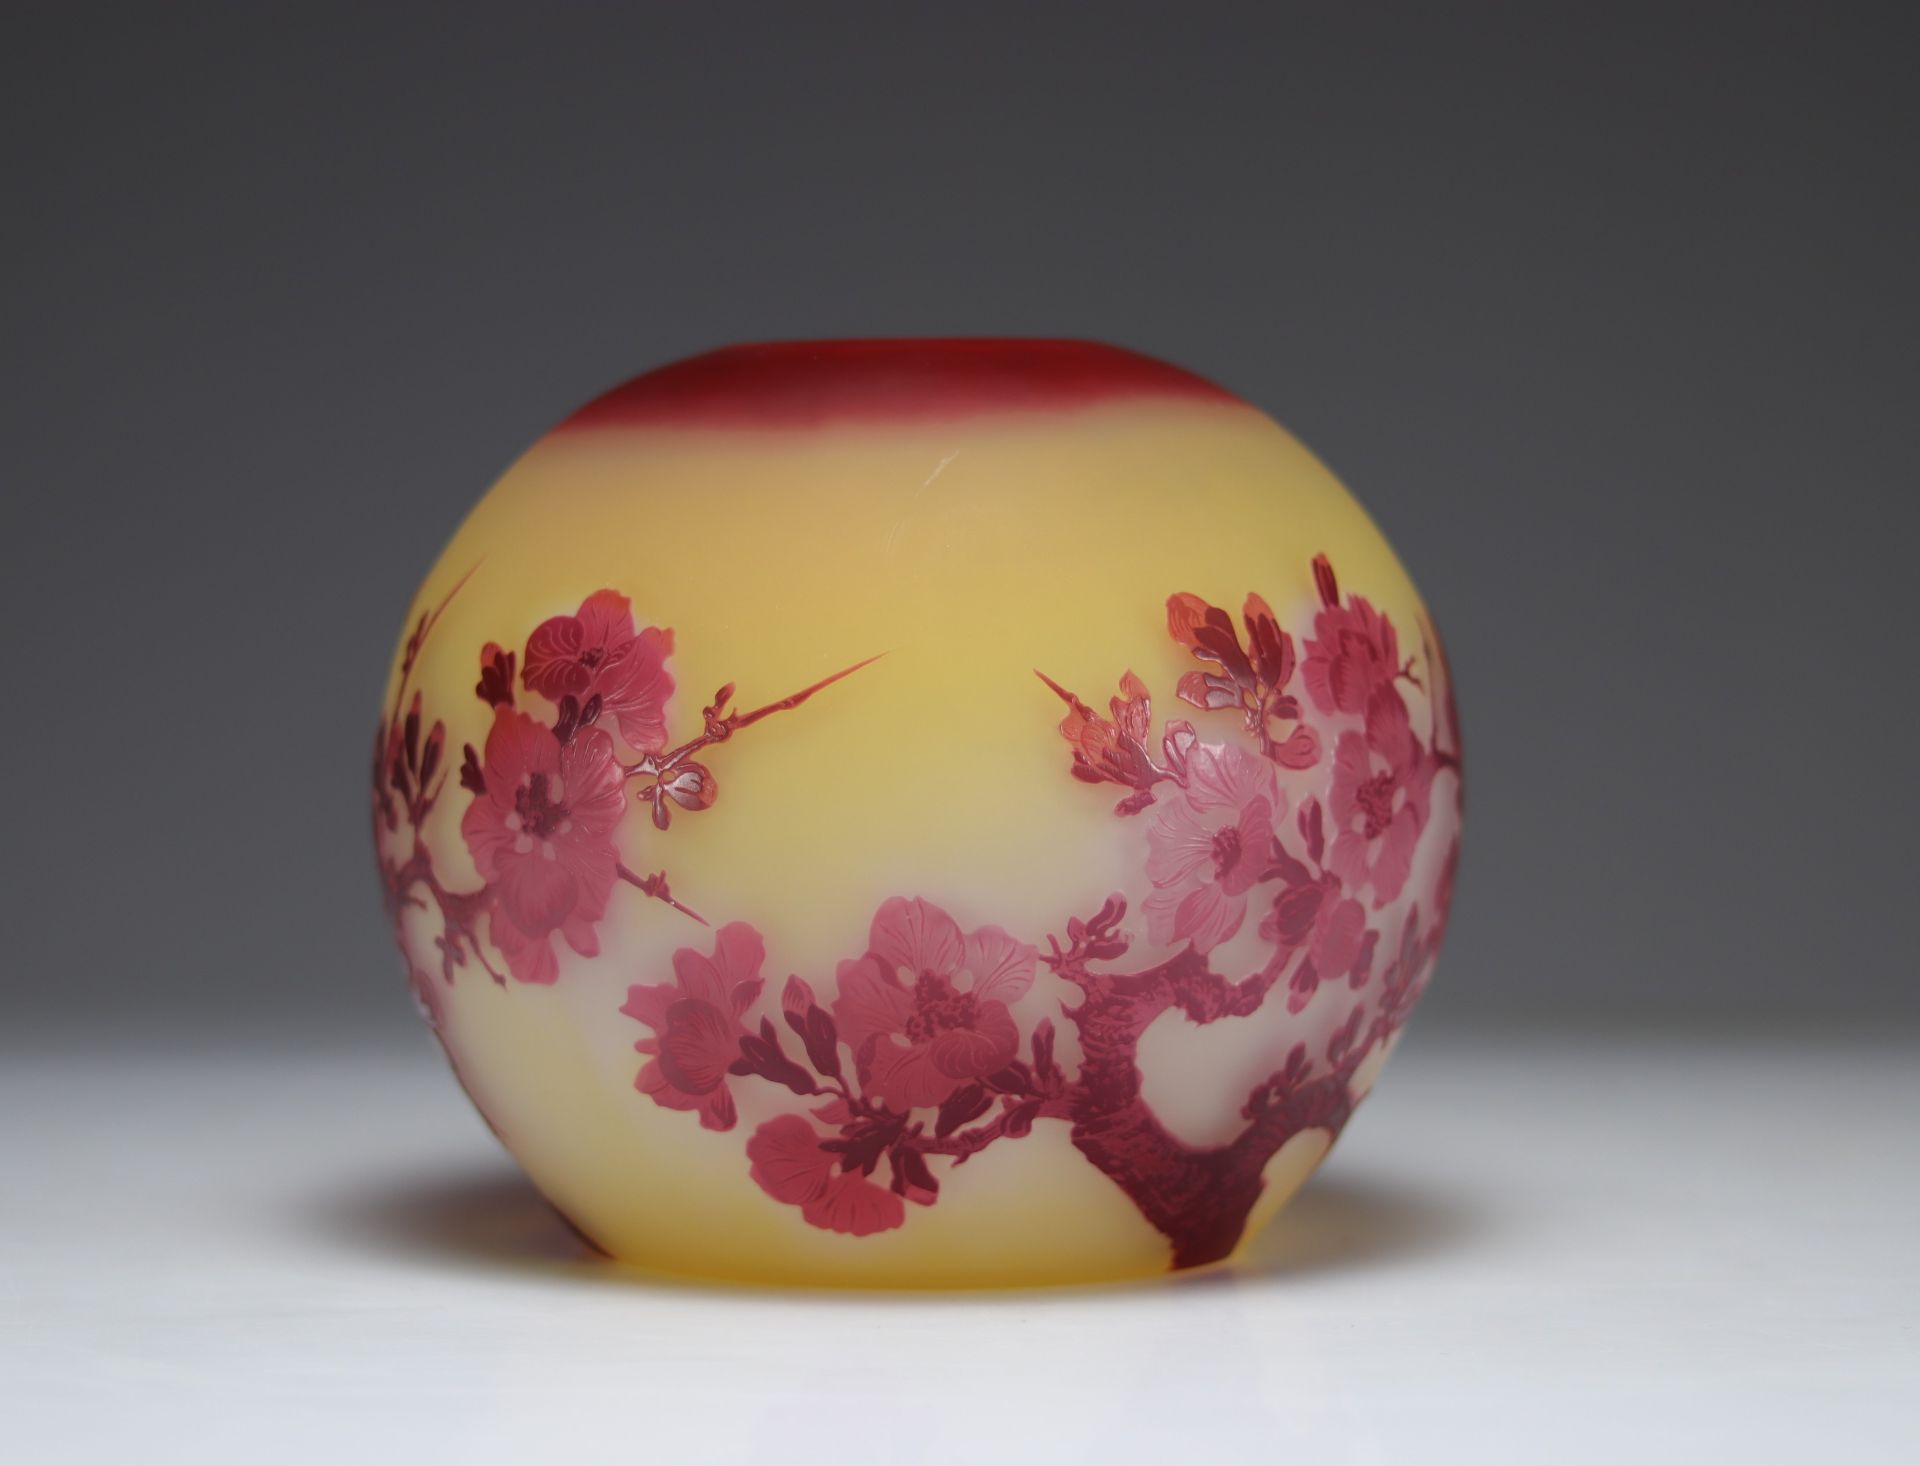 Emile Galle lamp base decorated with apple blossoms - Image 2 of 4